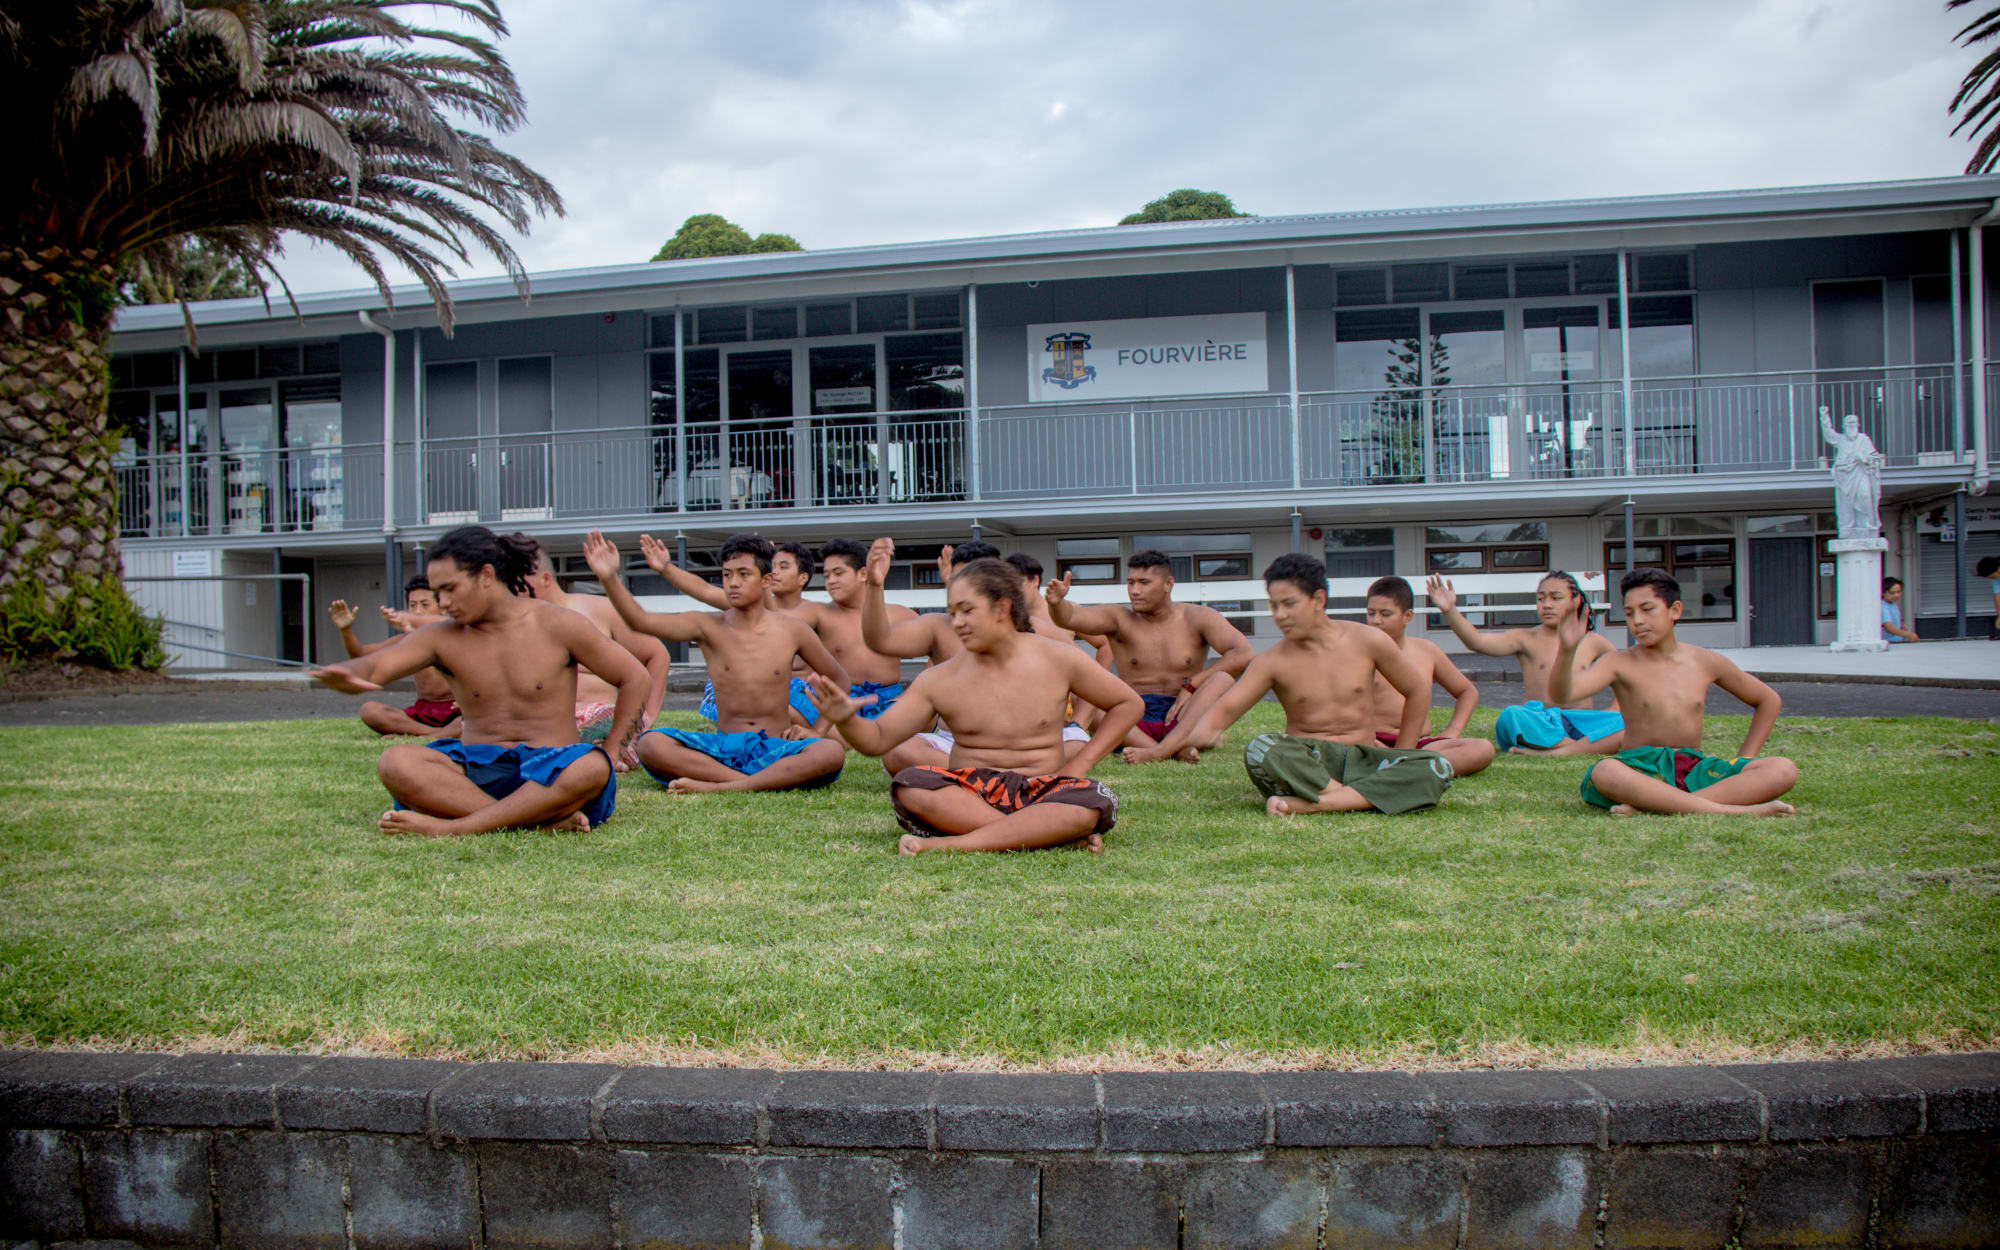 The St Paul's College Samoan Group practice outside for Polyfest.